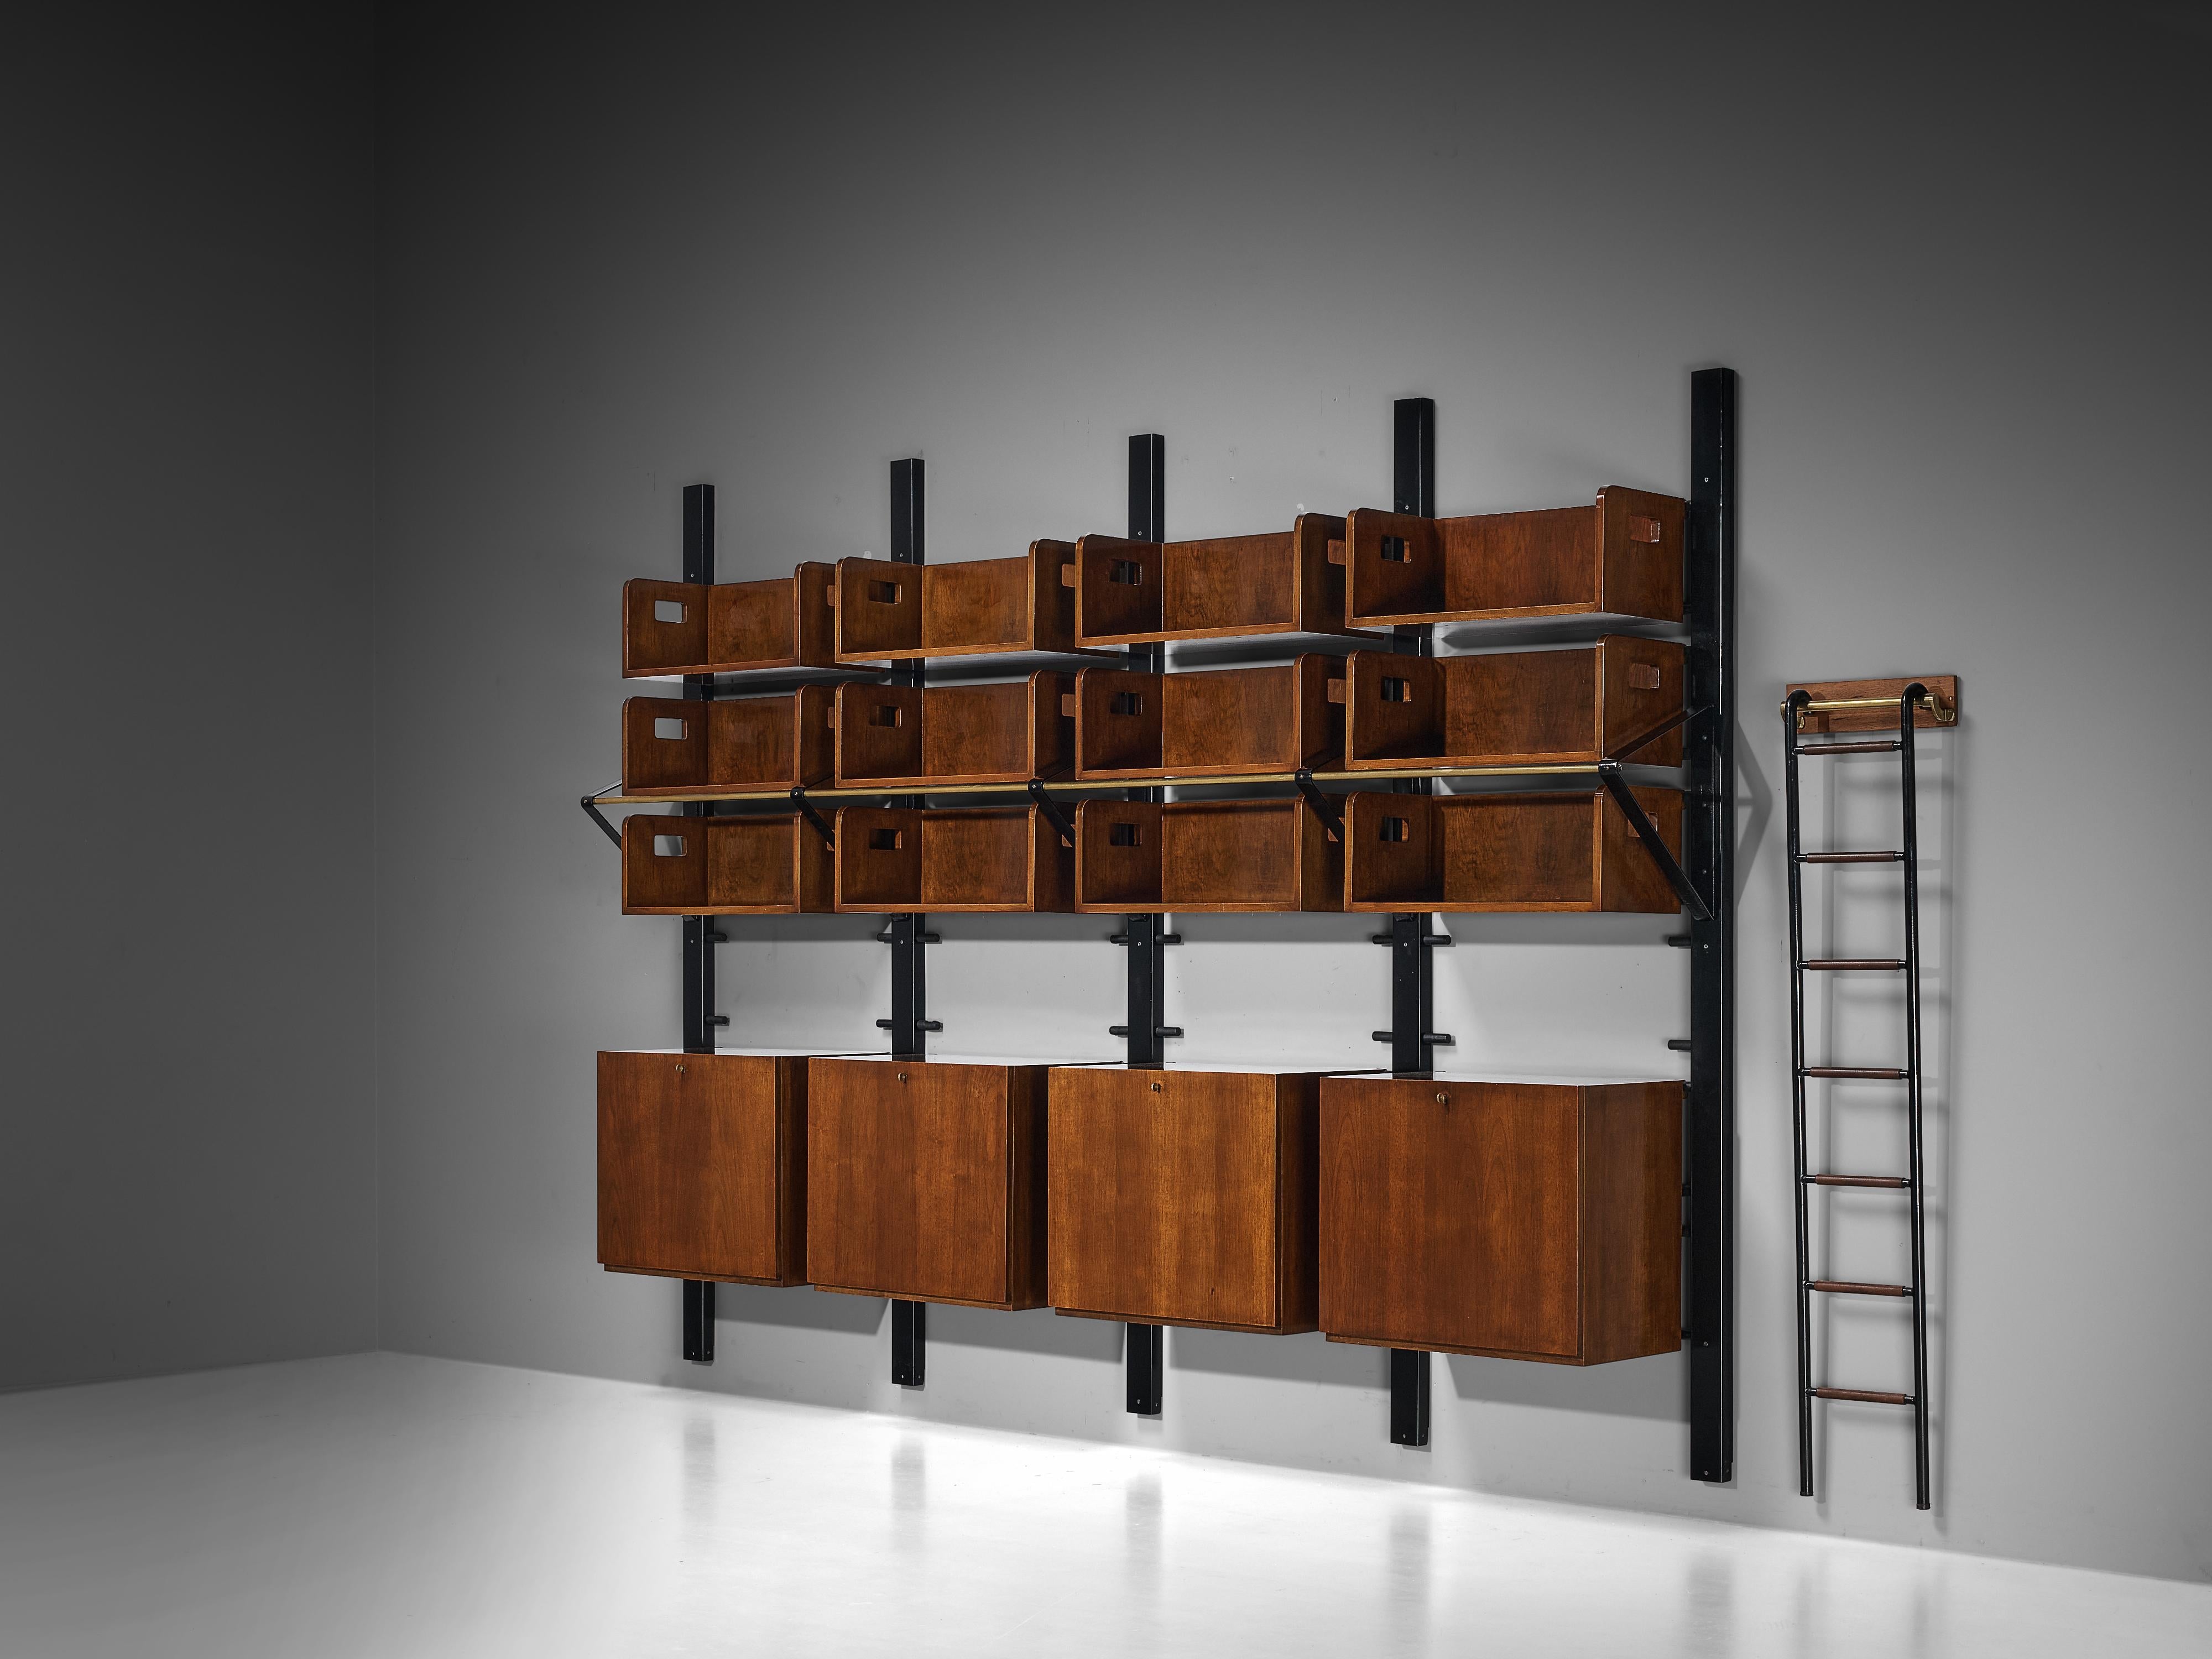 Italian Custom Wall Unit Bookcase with Ladder in Walnut and Iron